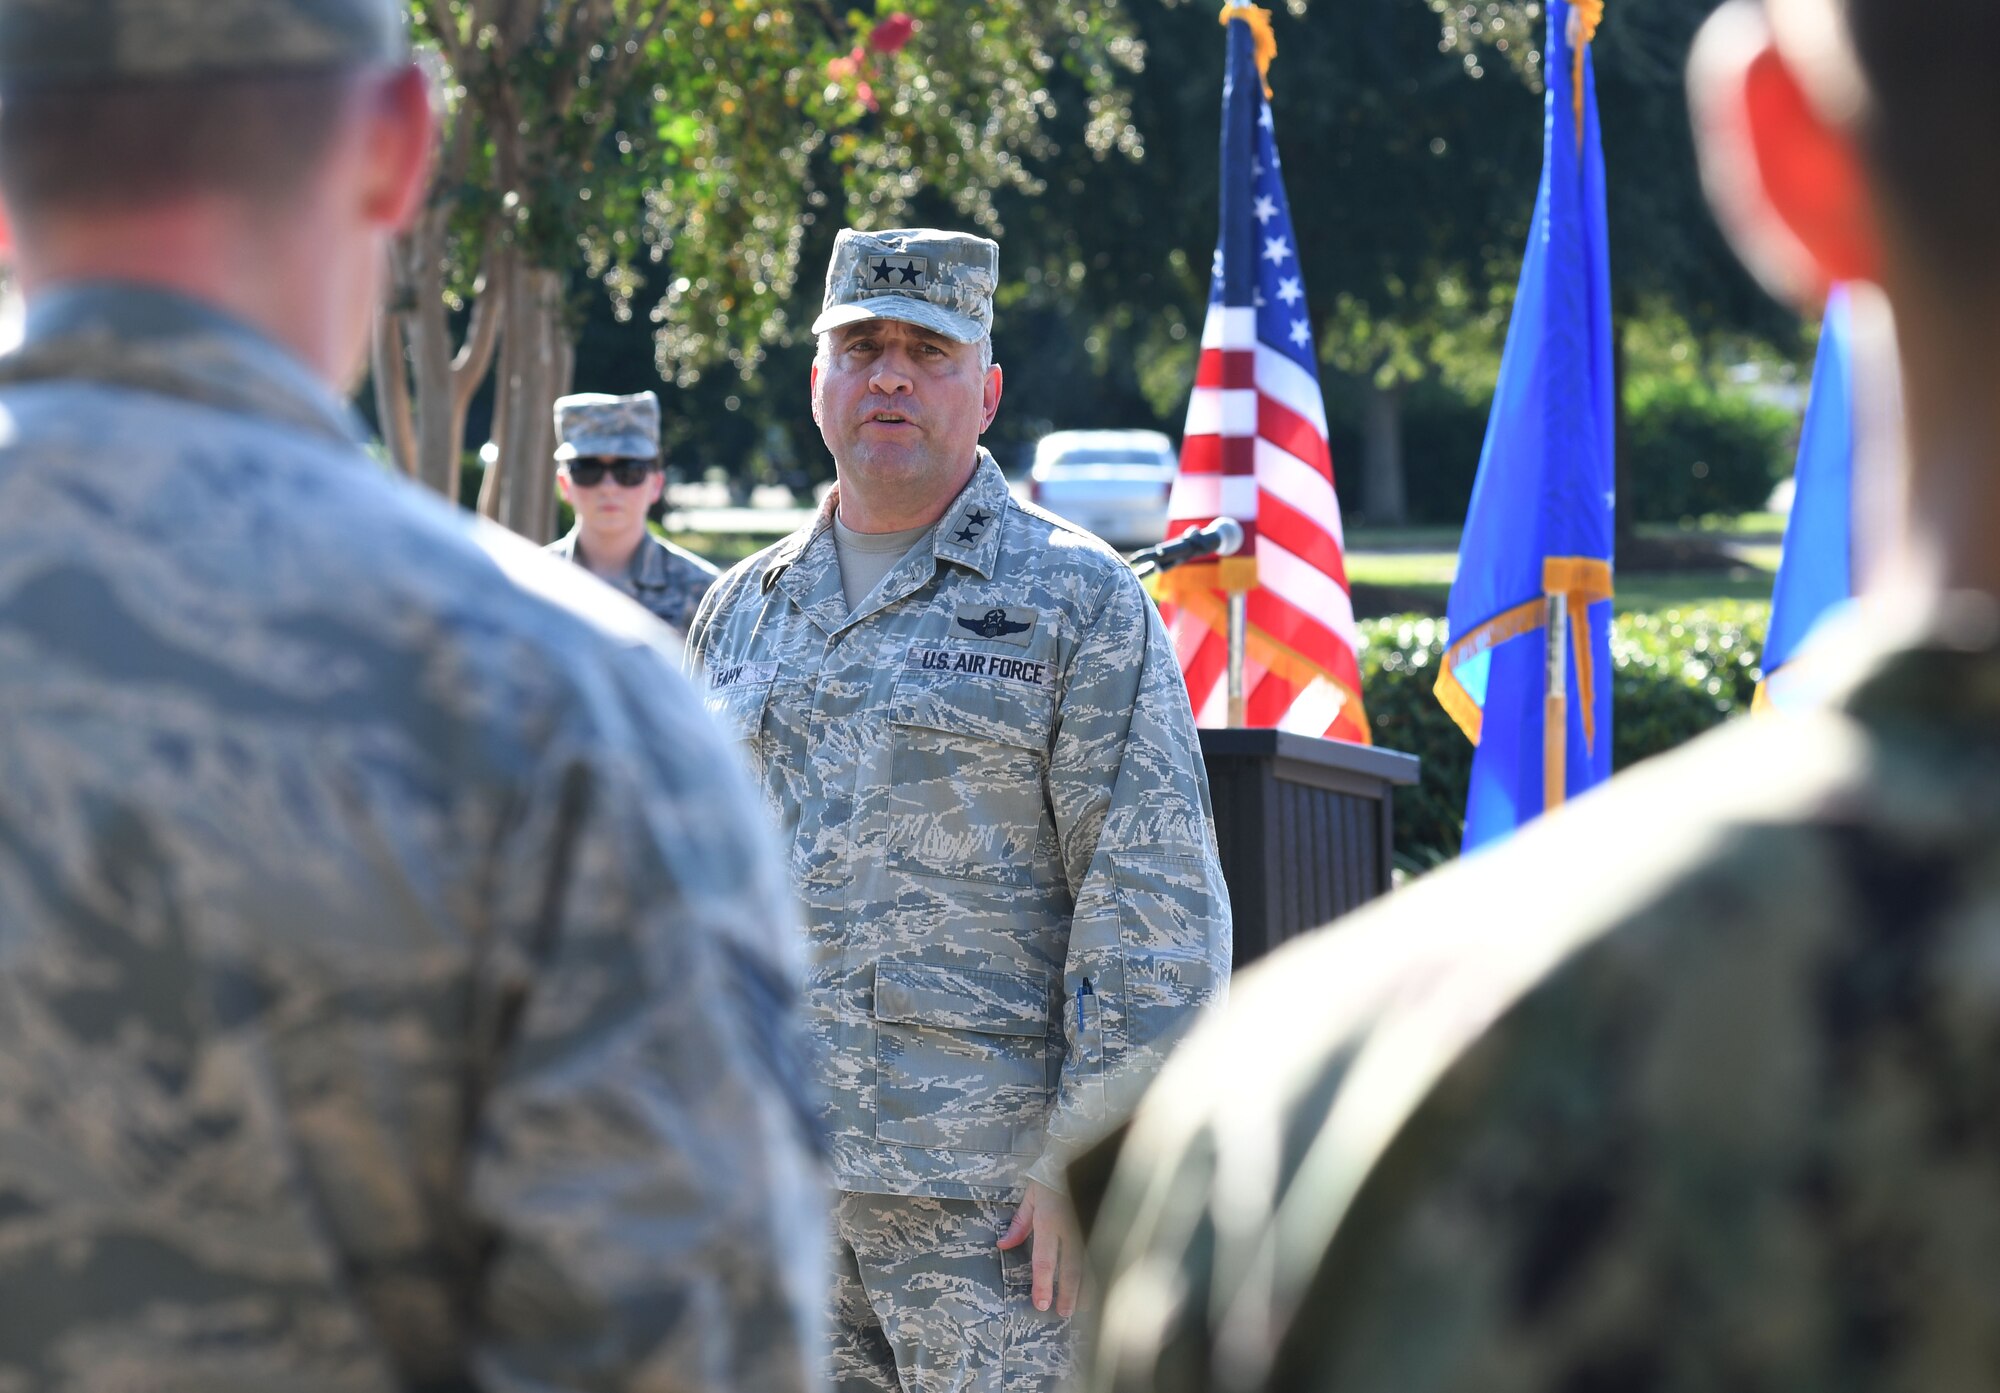 U.S. Air Force Maj. Gen. Timothy Leahy, 2nd Air Force commander, delivers remarks during the POW/MIA Retreat Ceremony at Keesler Air Force Base, Mississippi, Sept. 20, 2018. The event was held to raise awareness and to pay tribute to all prisoners of war and those military members still missing in action. (U.S. Air Force photo by Kemberly Groue)